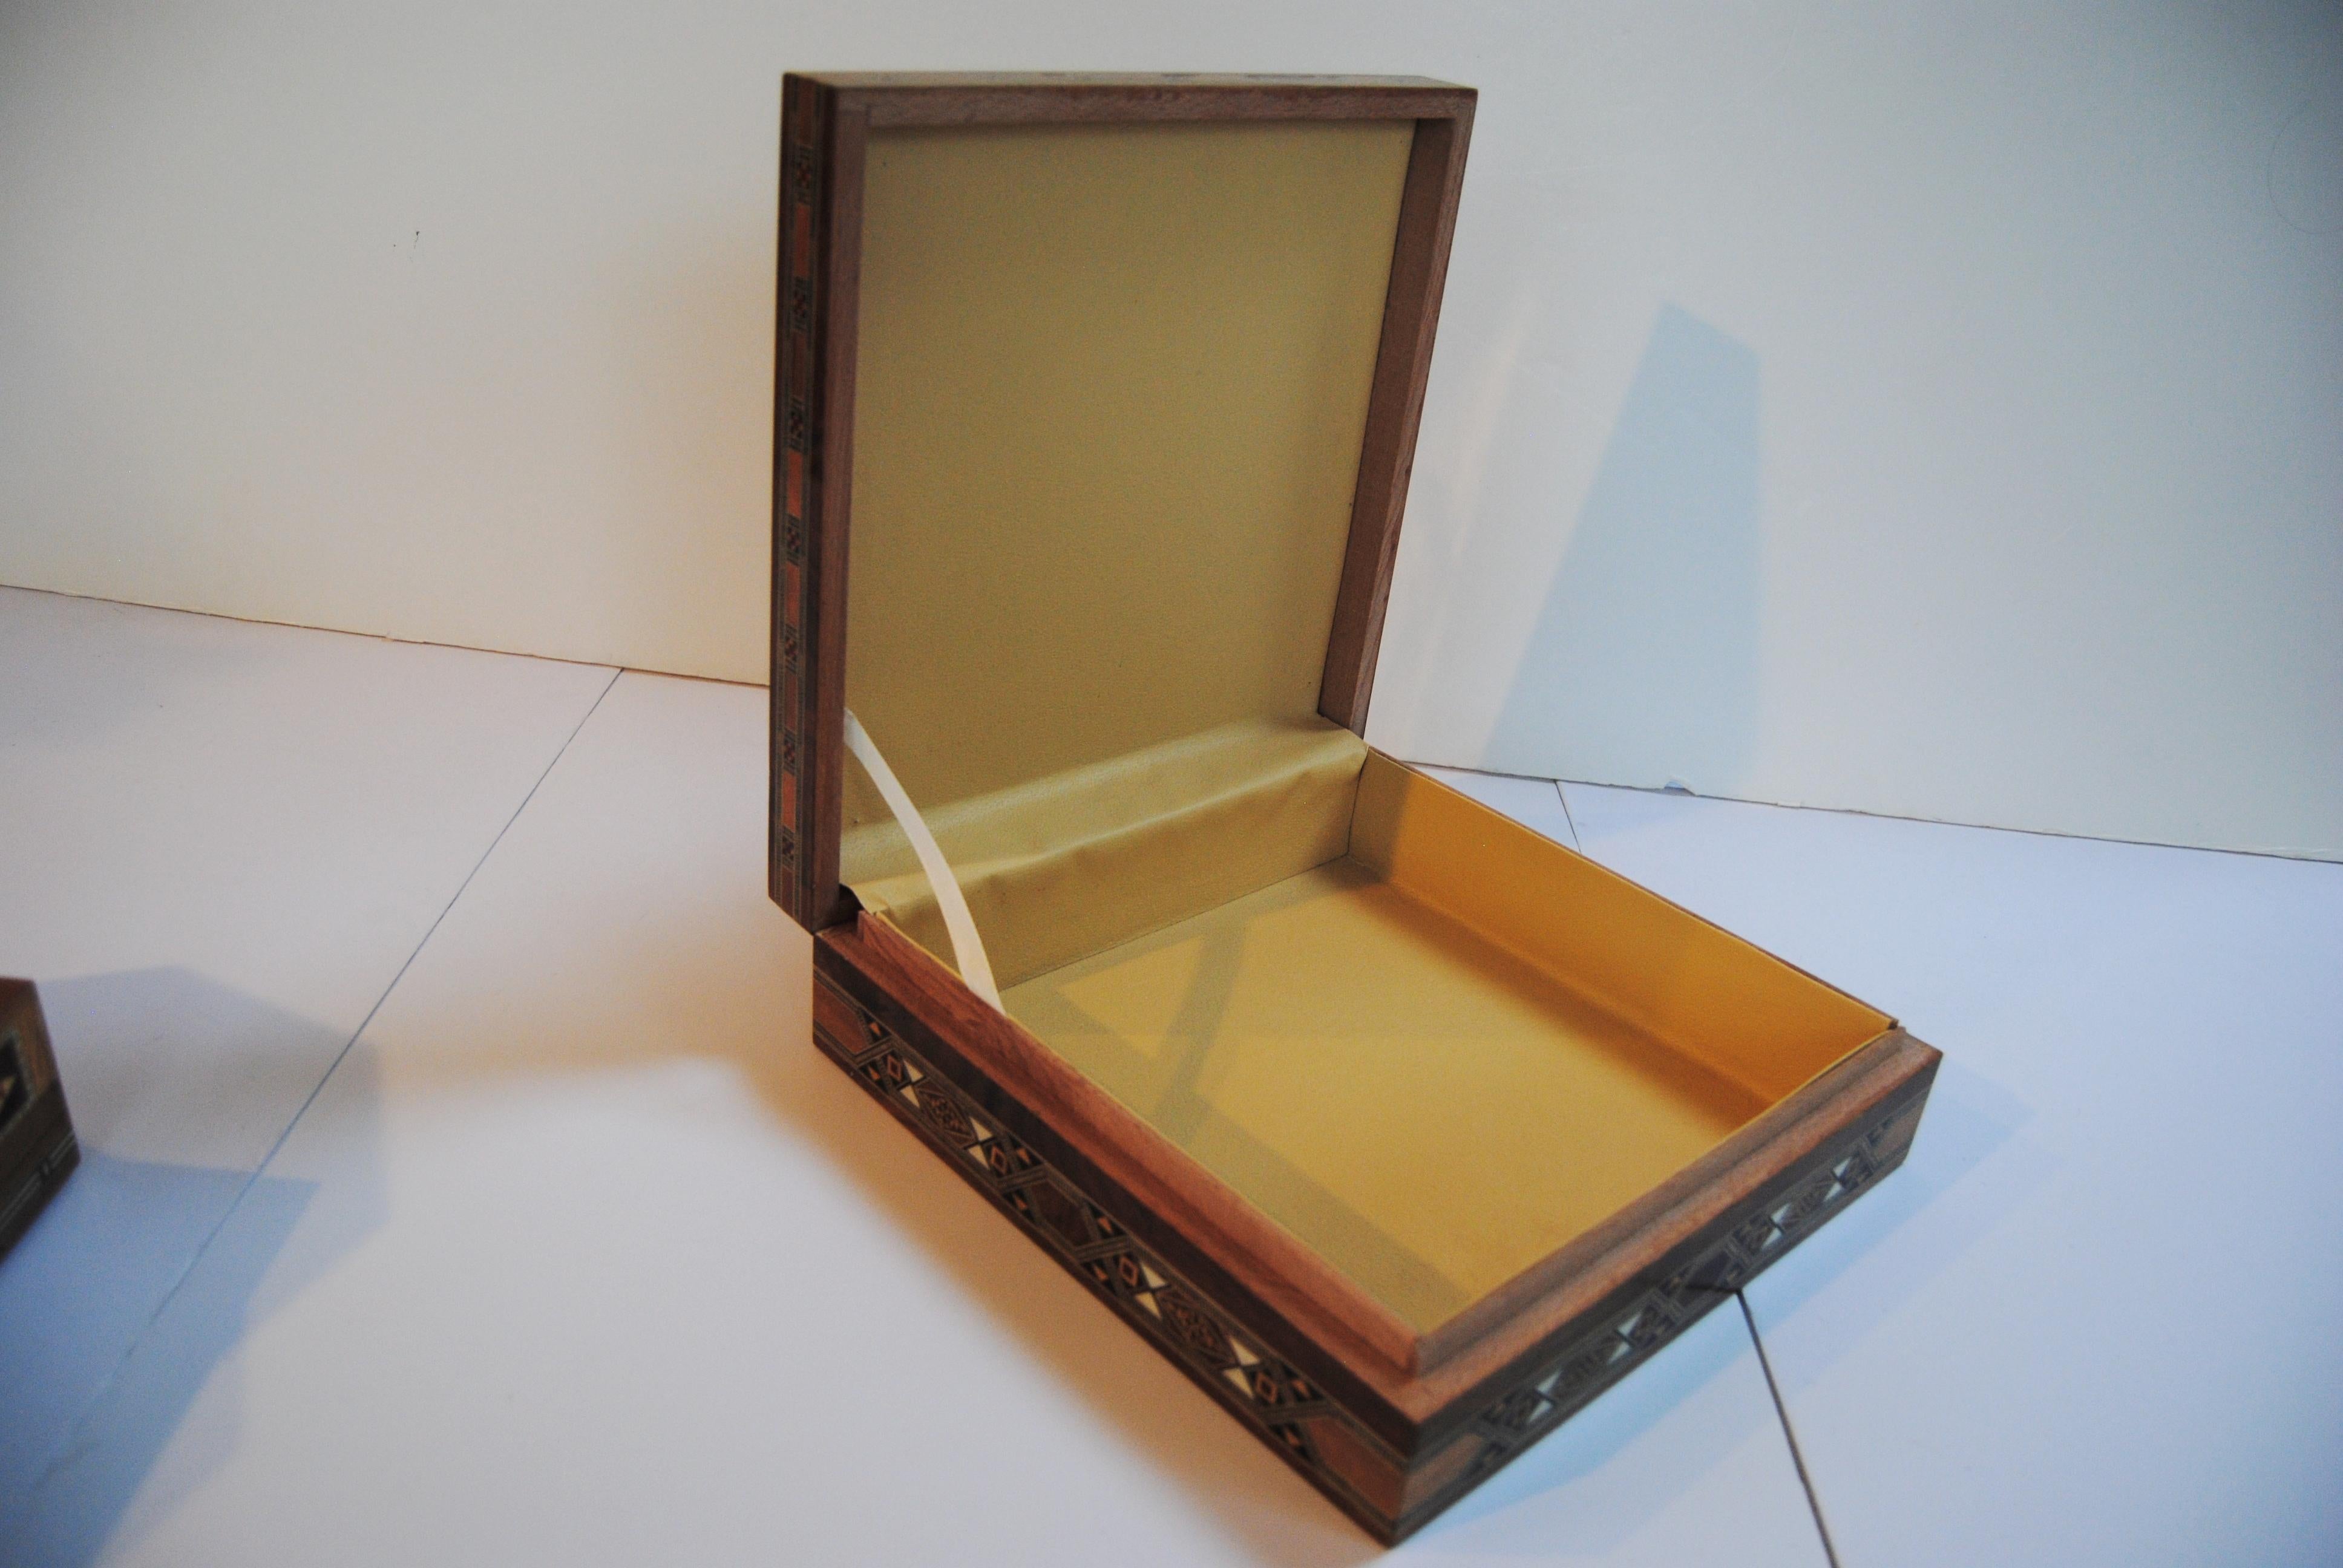 20th Century Syrian Walnut Wood Box Inlaid with Mother of Pearl and Cream Leather Lining For Sale